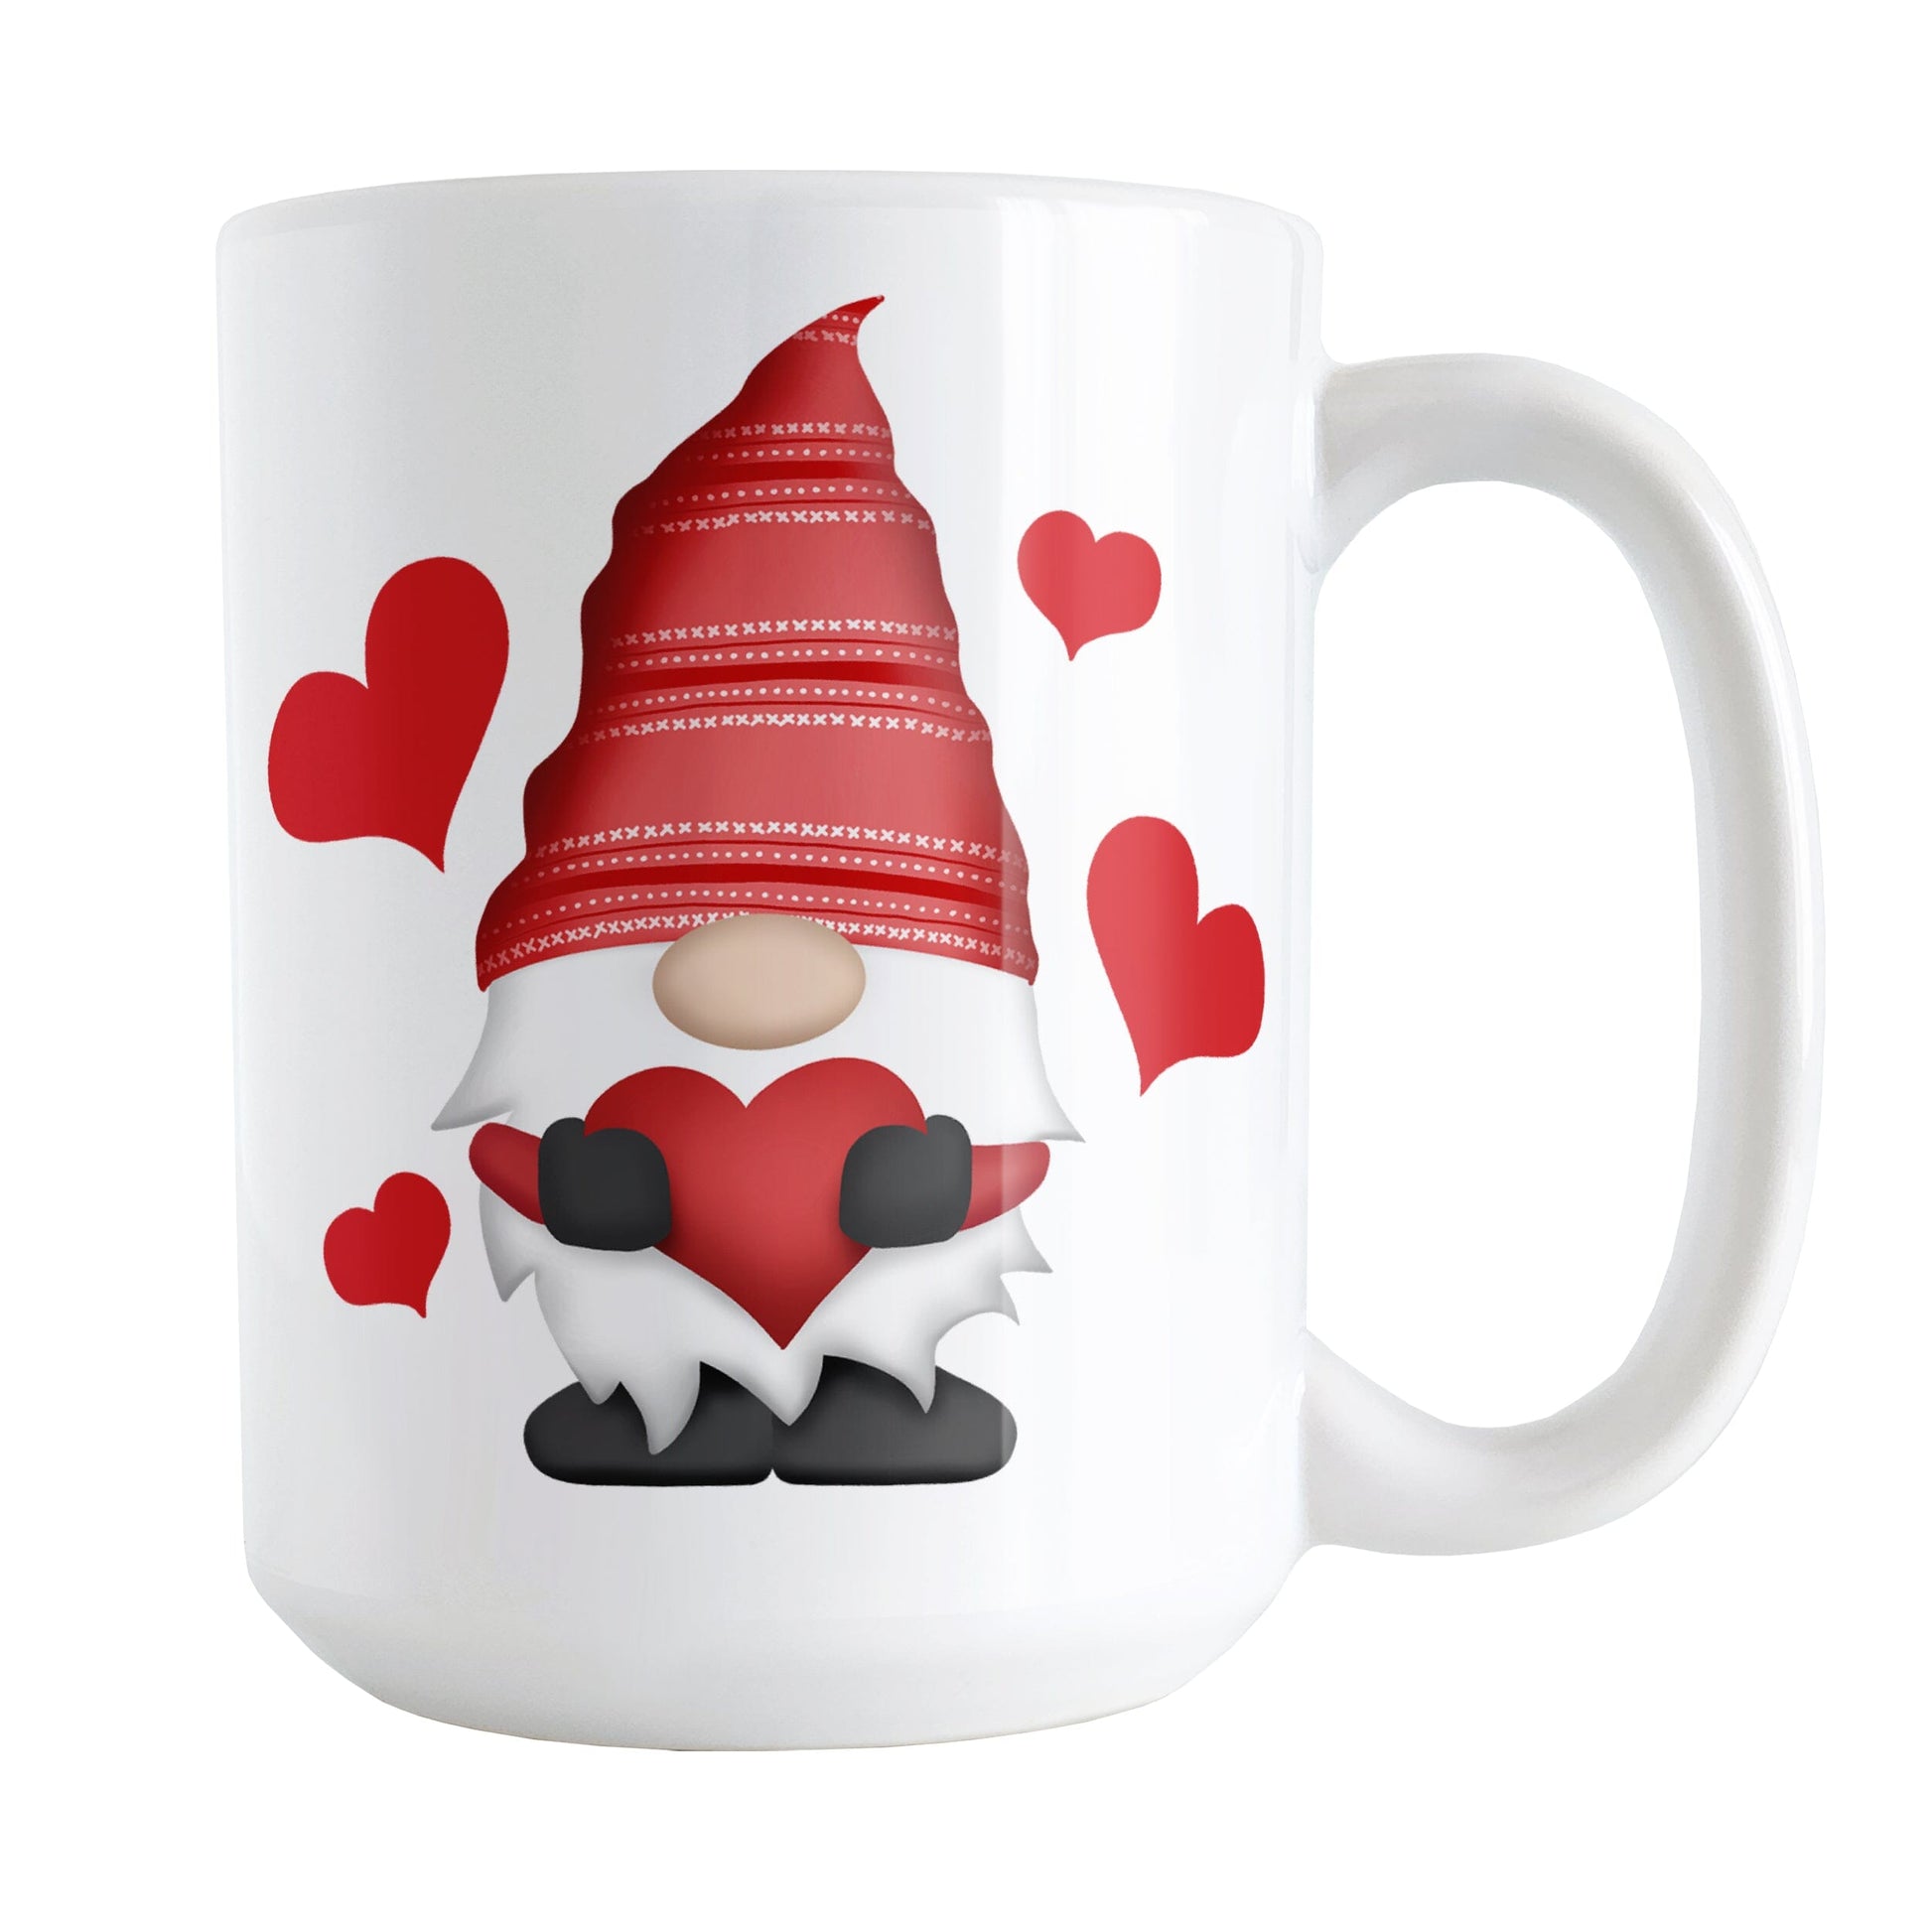 Red Heart Gnome Mug (15oz) at Amy's Coffee Mugs. A ceramic coffee mug designed with an adorable gnome wearing a festive red hat and holding a large red heart. Around the cute gnome are bold red hearts. This loving gnome illustration is on both sides of the mug.